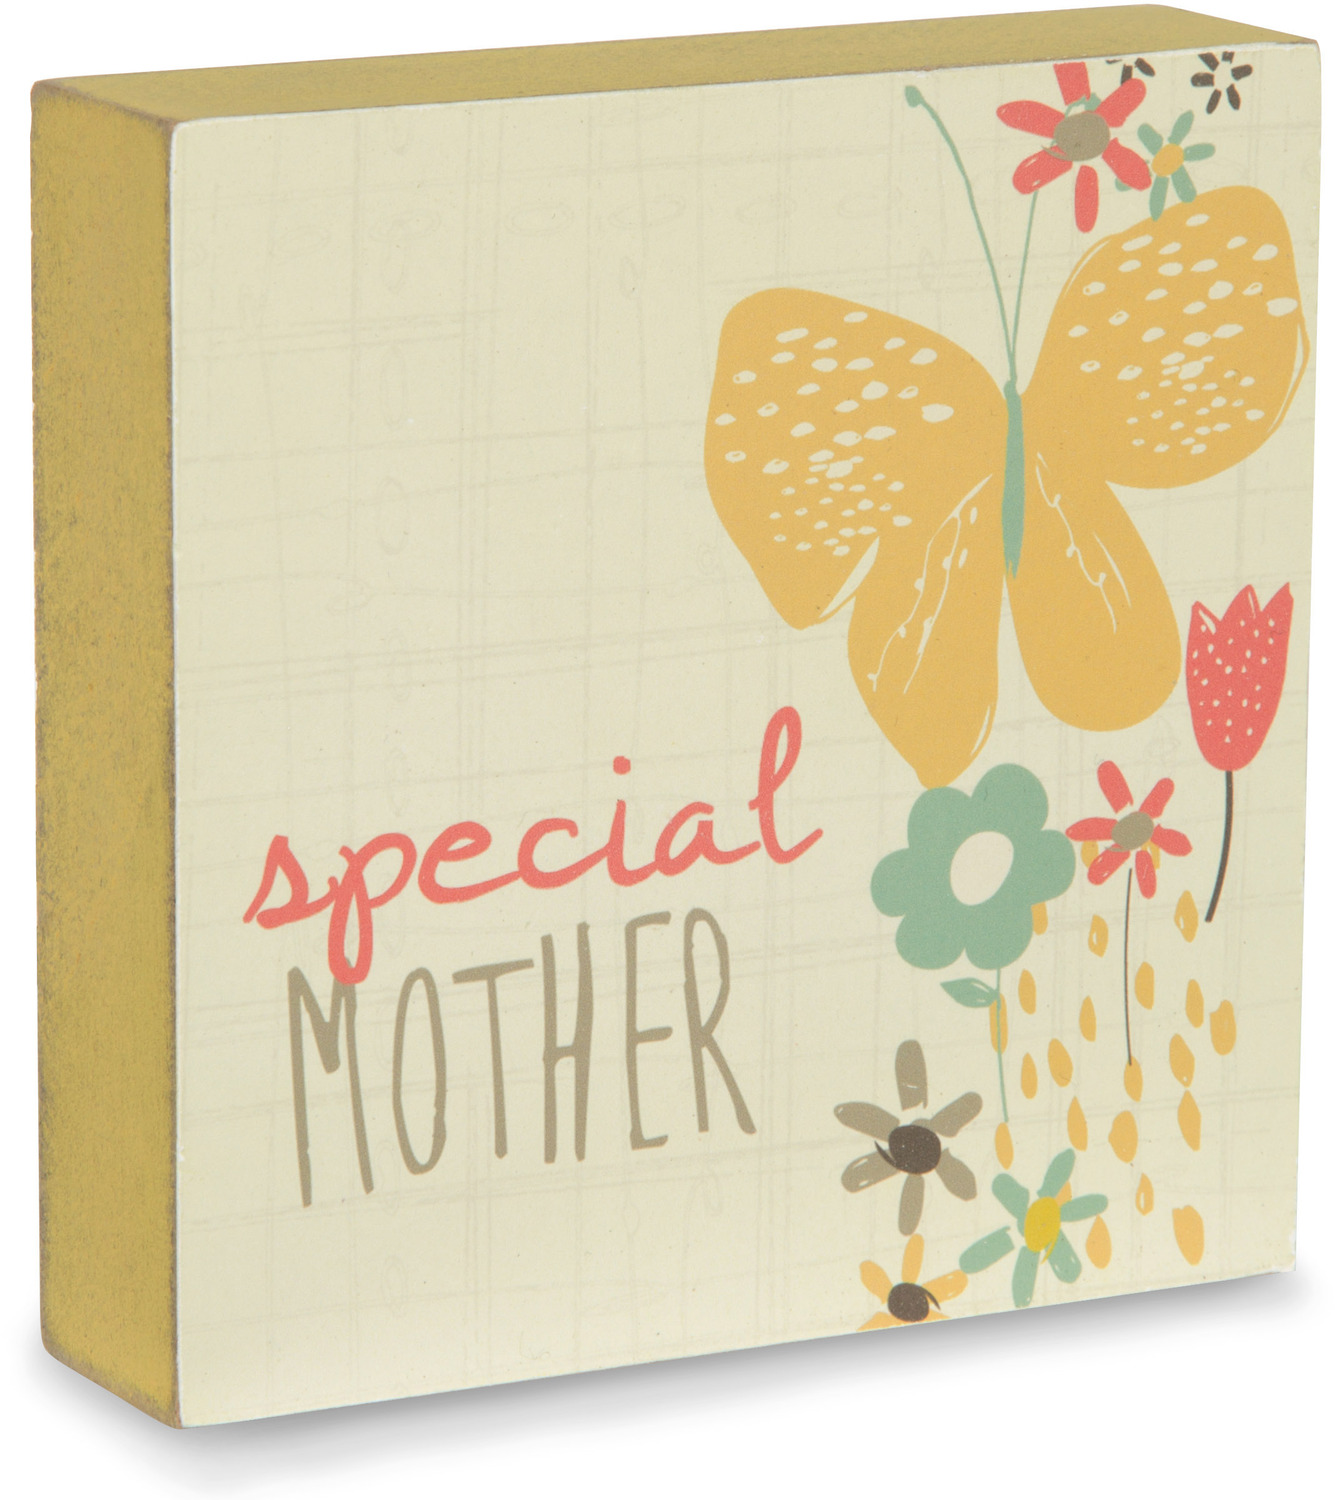 Special Mother by Bloom by Amylee Weeks - Special Mother - 4" x 4" Plaque